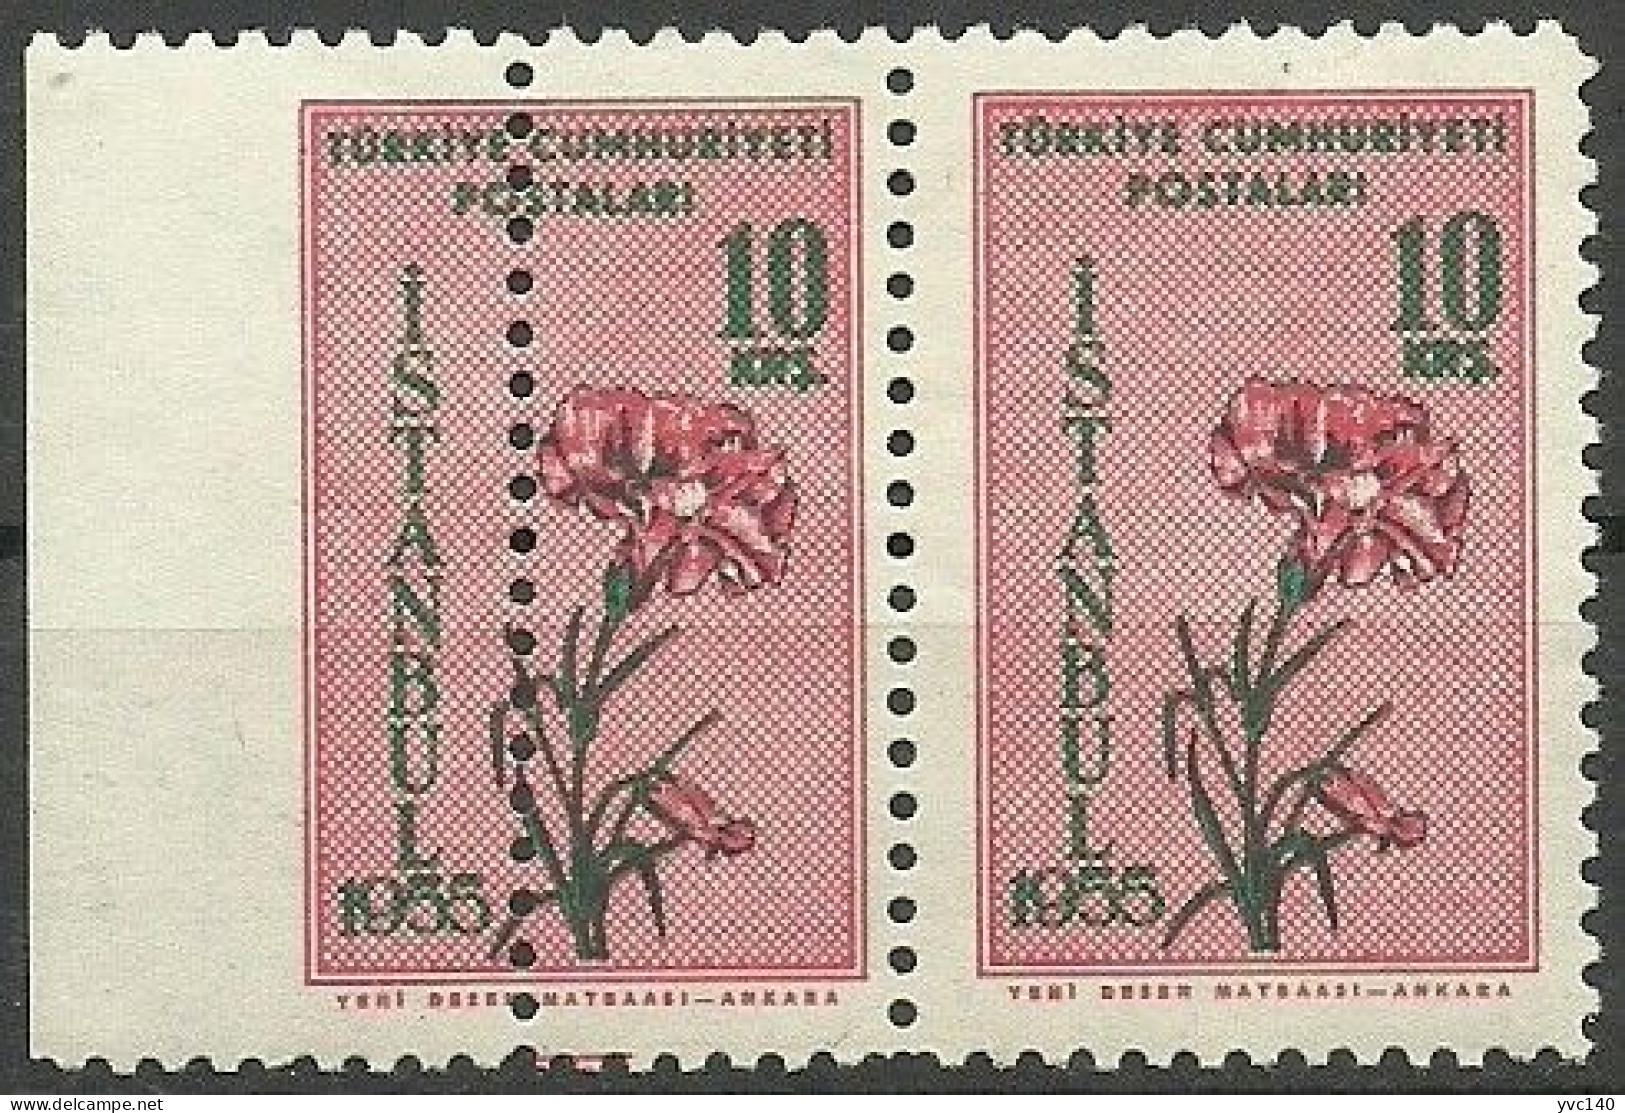 Turkey; 1955 Istanbul Spring And Flower Festivity 10 K. ERROR "Shifted Perf." - Unused Stamps